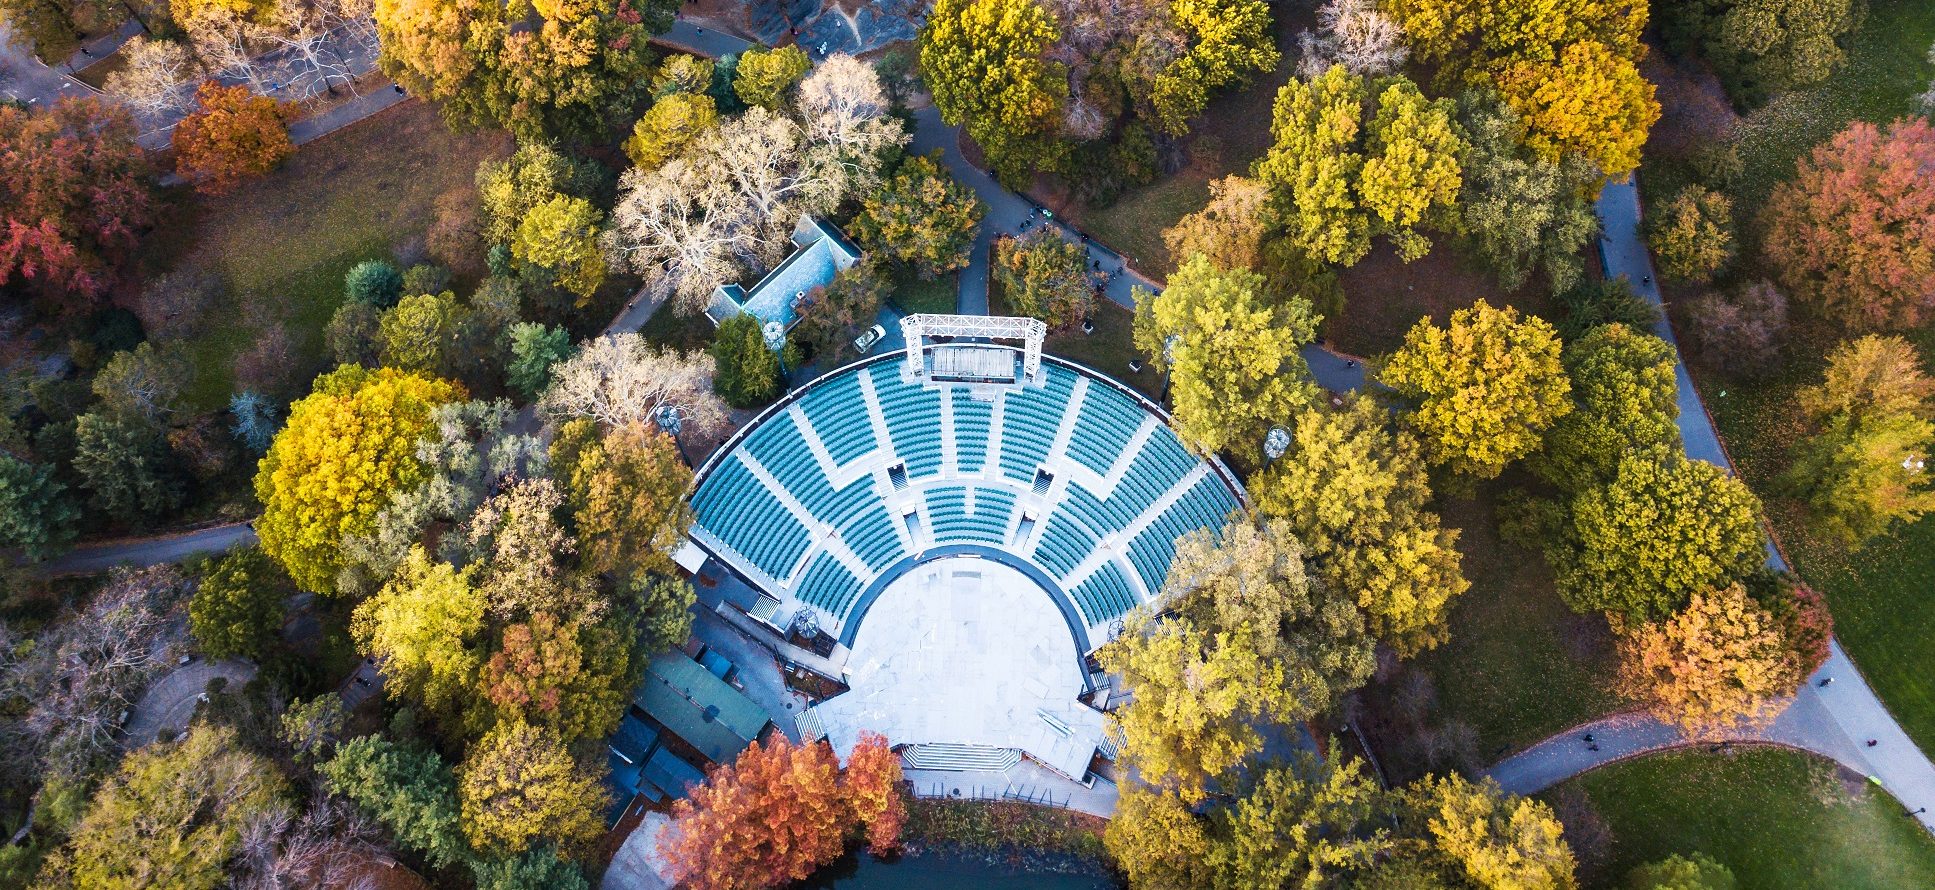 Aerial view of Central park theater in autumn